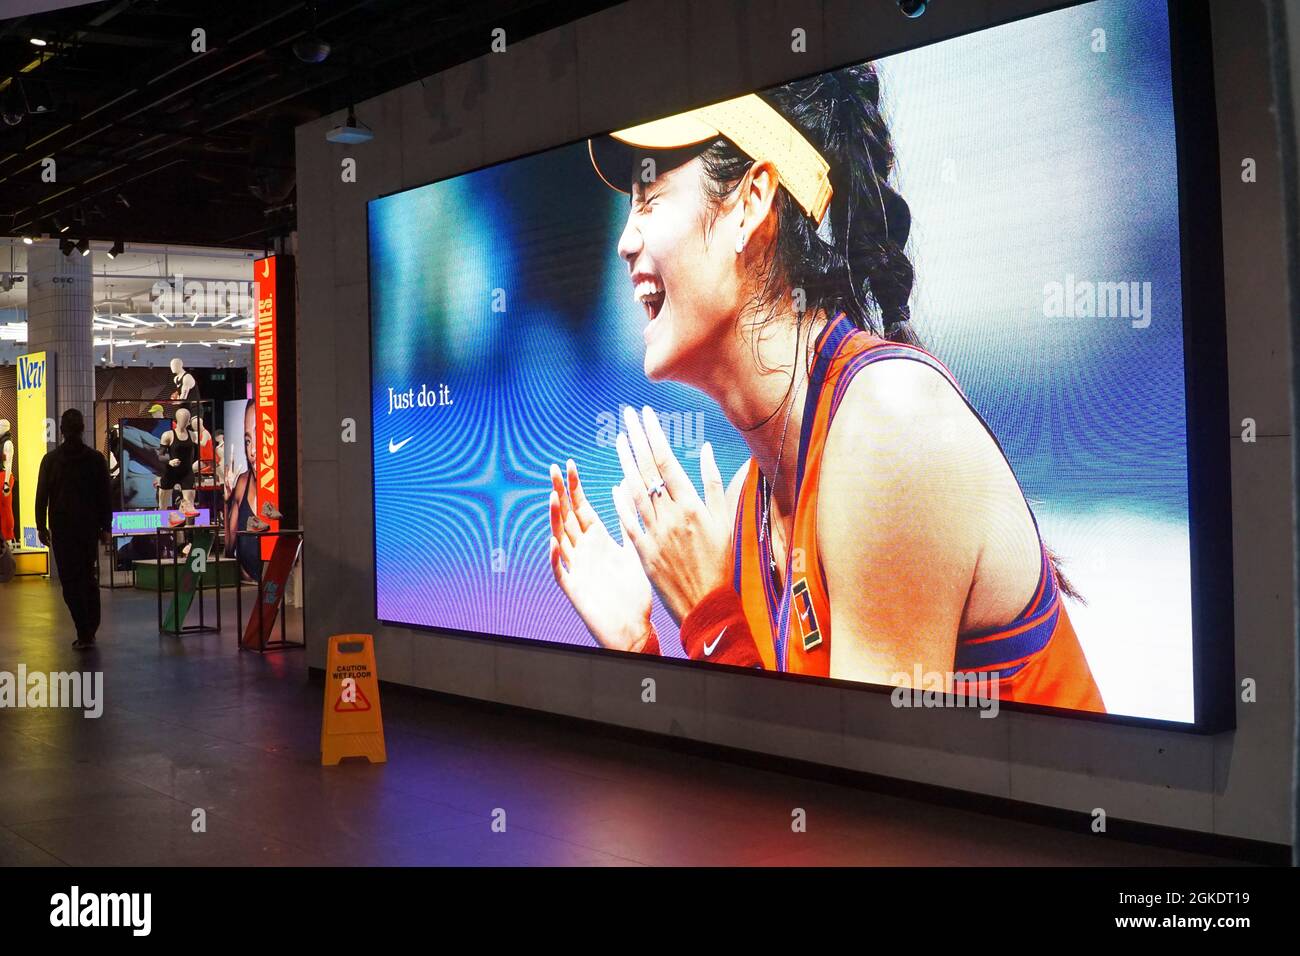 London, UK, 14 September 2021: At Nike Town at Oxford Circus in the heart of the West End giant screens show images of tennis prodigy Emma Raducanu, taken a moment after she won the US Open tennis tournament. Emma Raducanu is sponsored by Nike and expected to be able to build a lucrative career with sponsorships and commercial endorsements due to her extraordinary sporting ability combined with good looks, youth and multi-cultural appeal based on her joint Romanian and Chinese heritage. Anna Watson/Alamy Live News Stock Photo